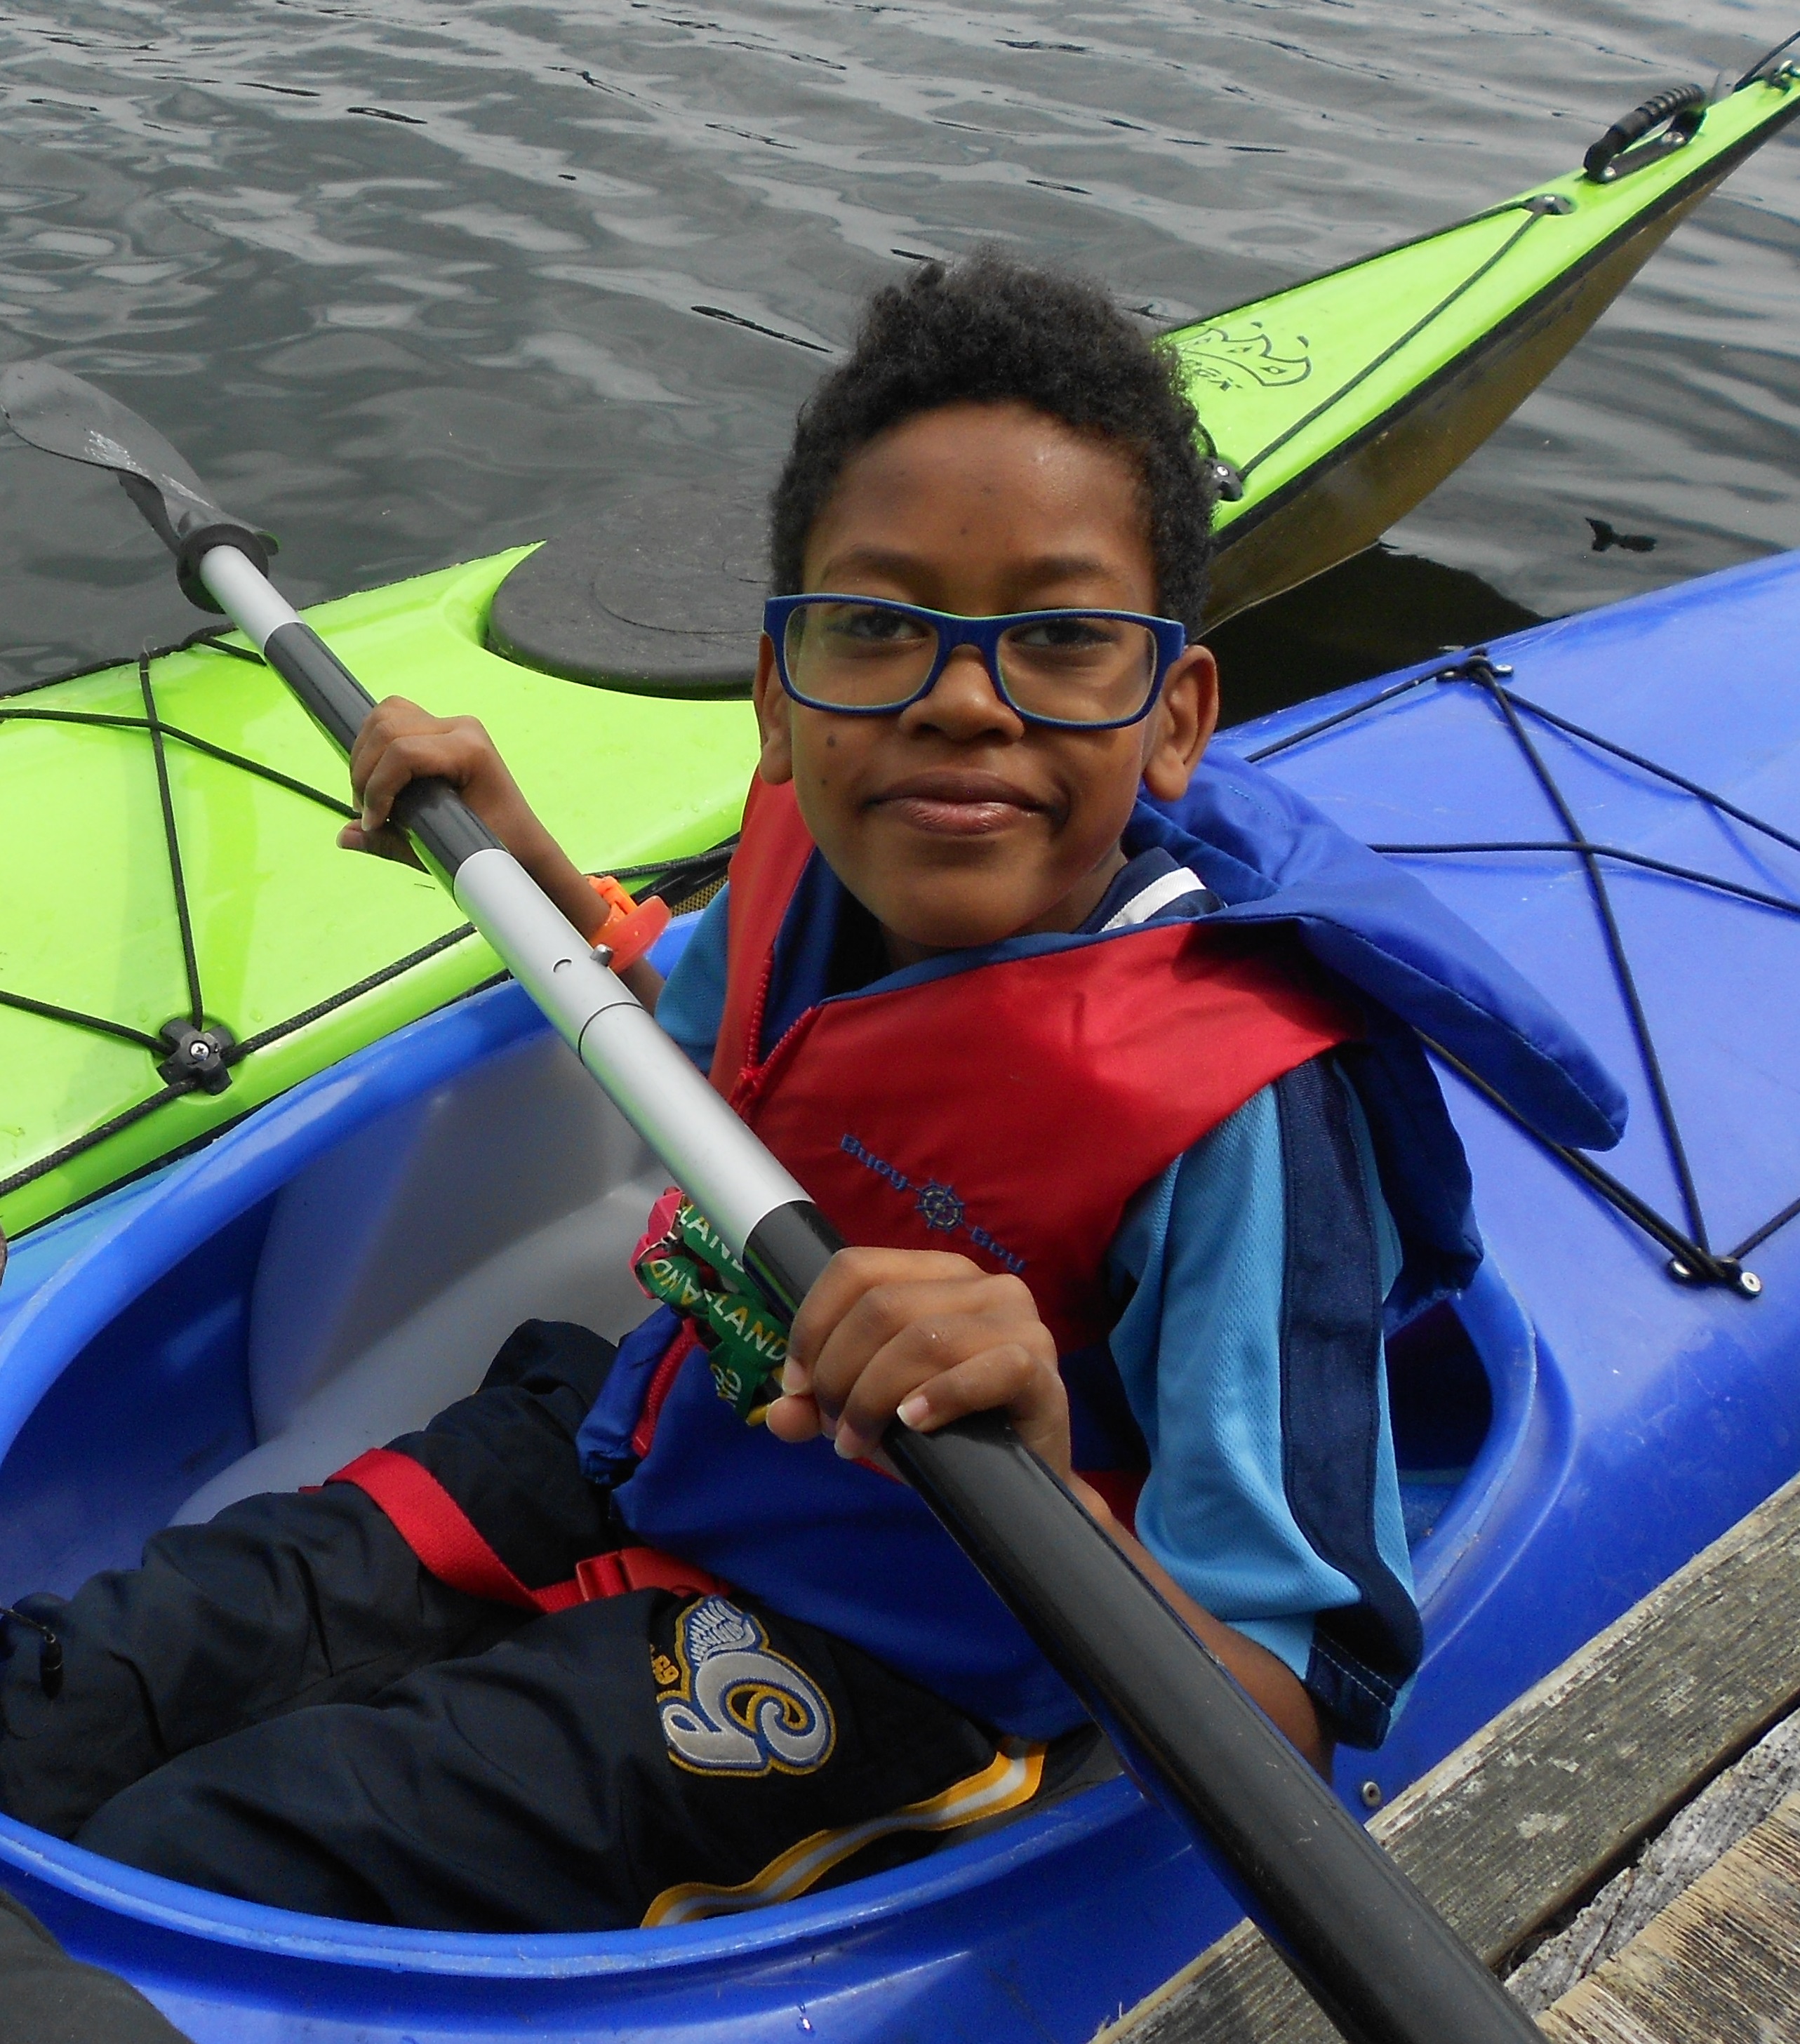 My nephew Abel in his kayak at the cottage